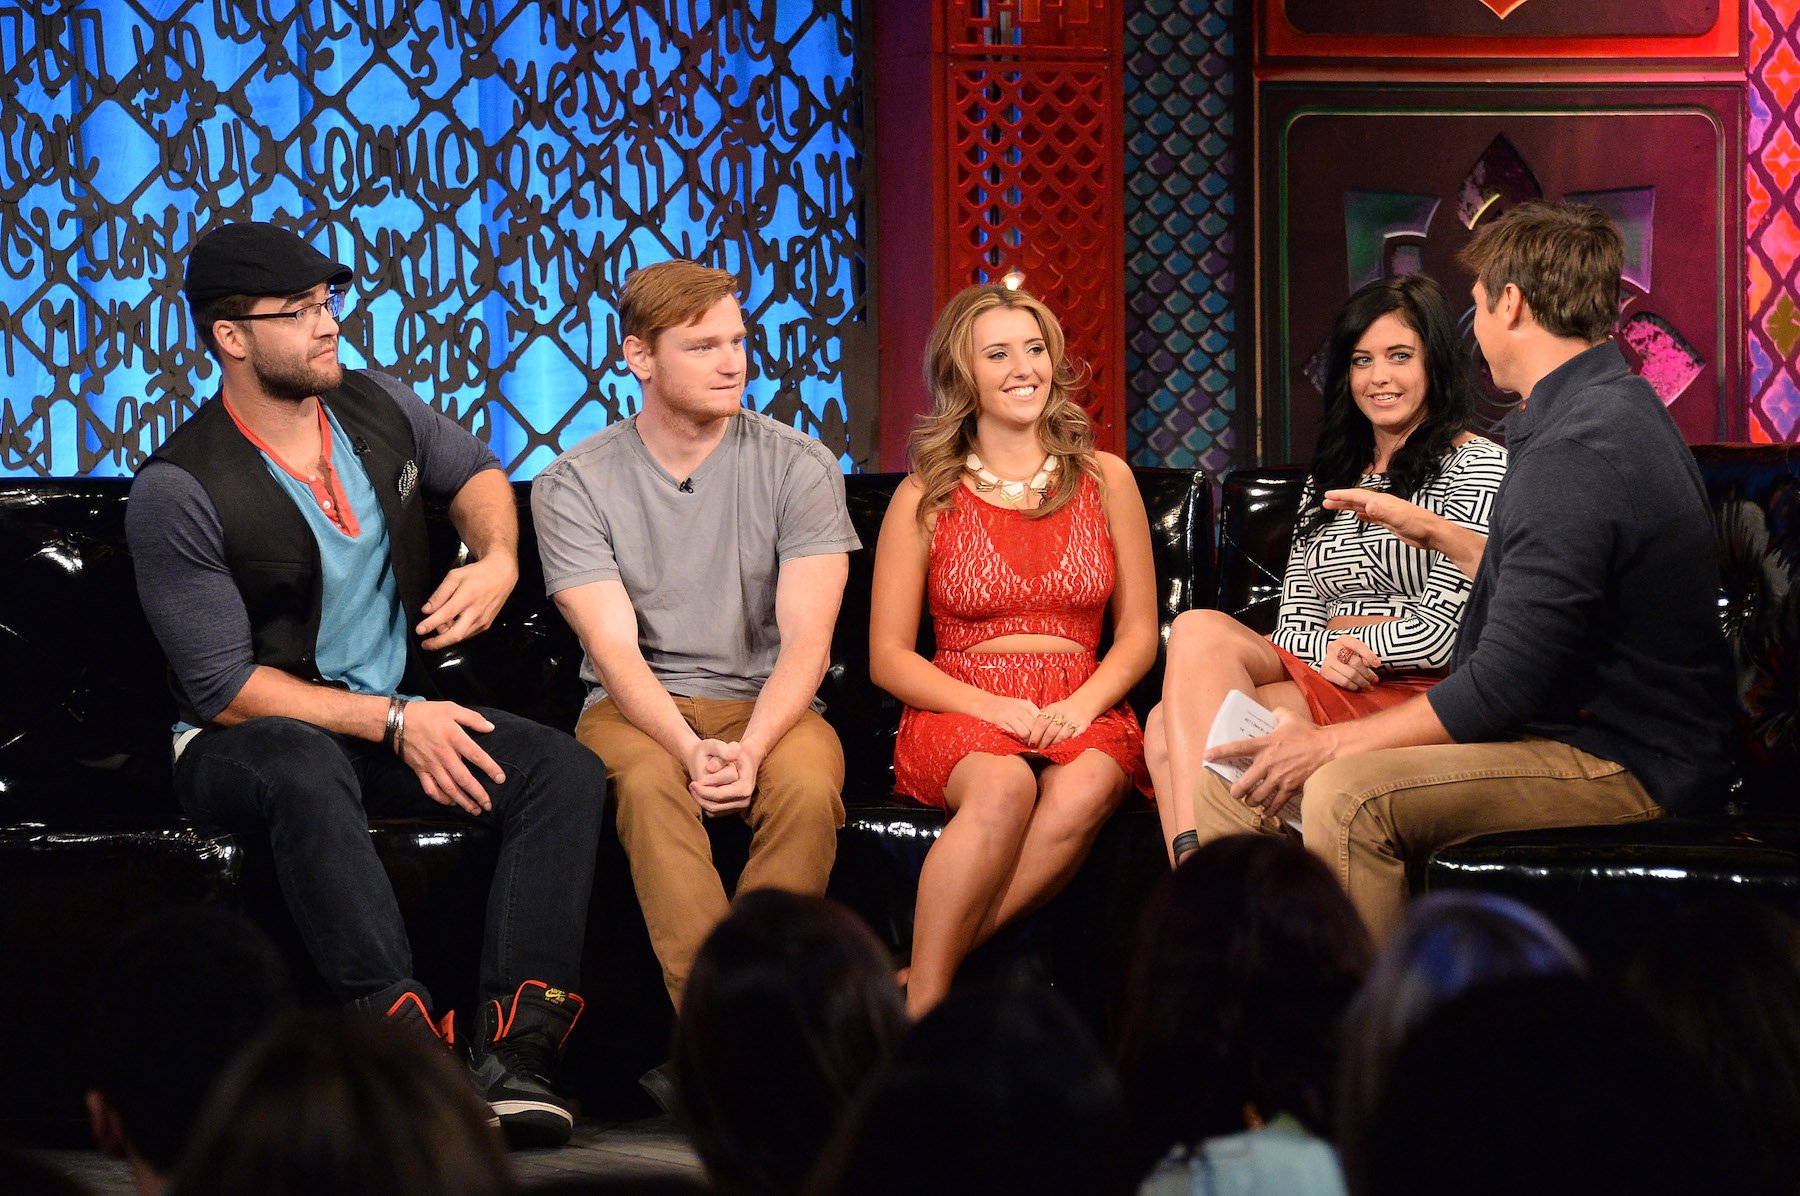 MTV's 'The Challenge' cast sitting at the 'Rivals II' reunion talking to each other